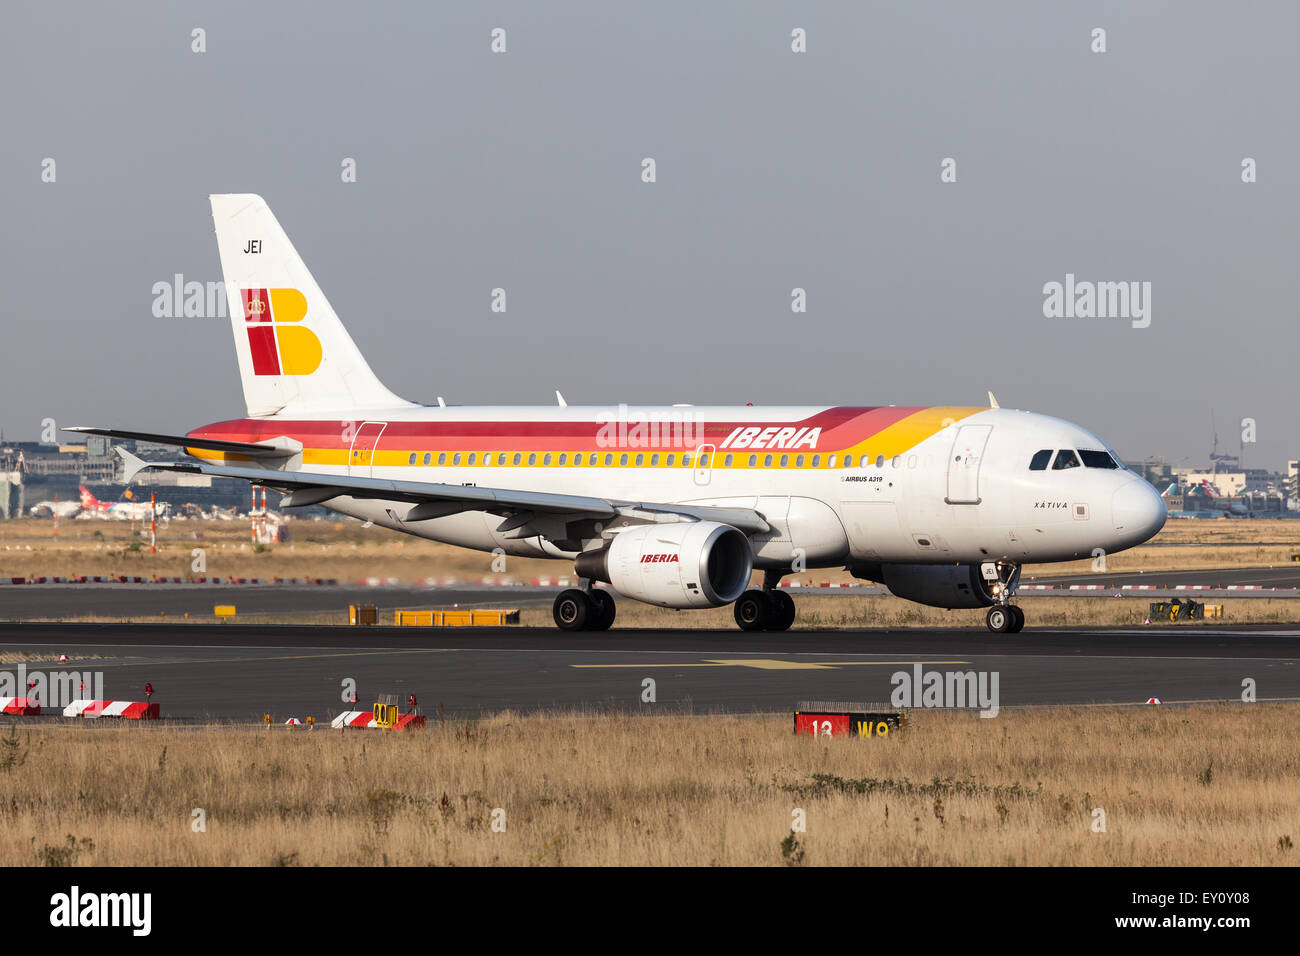 Airbus A318 of the Iberia Airlines ready for take off at the Frankfurt International Airport Stock Photo